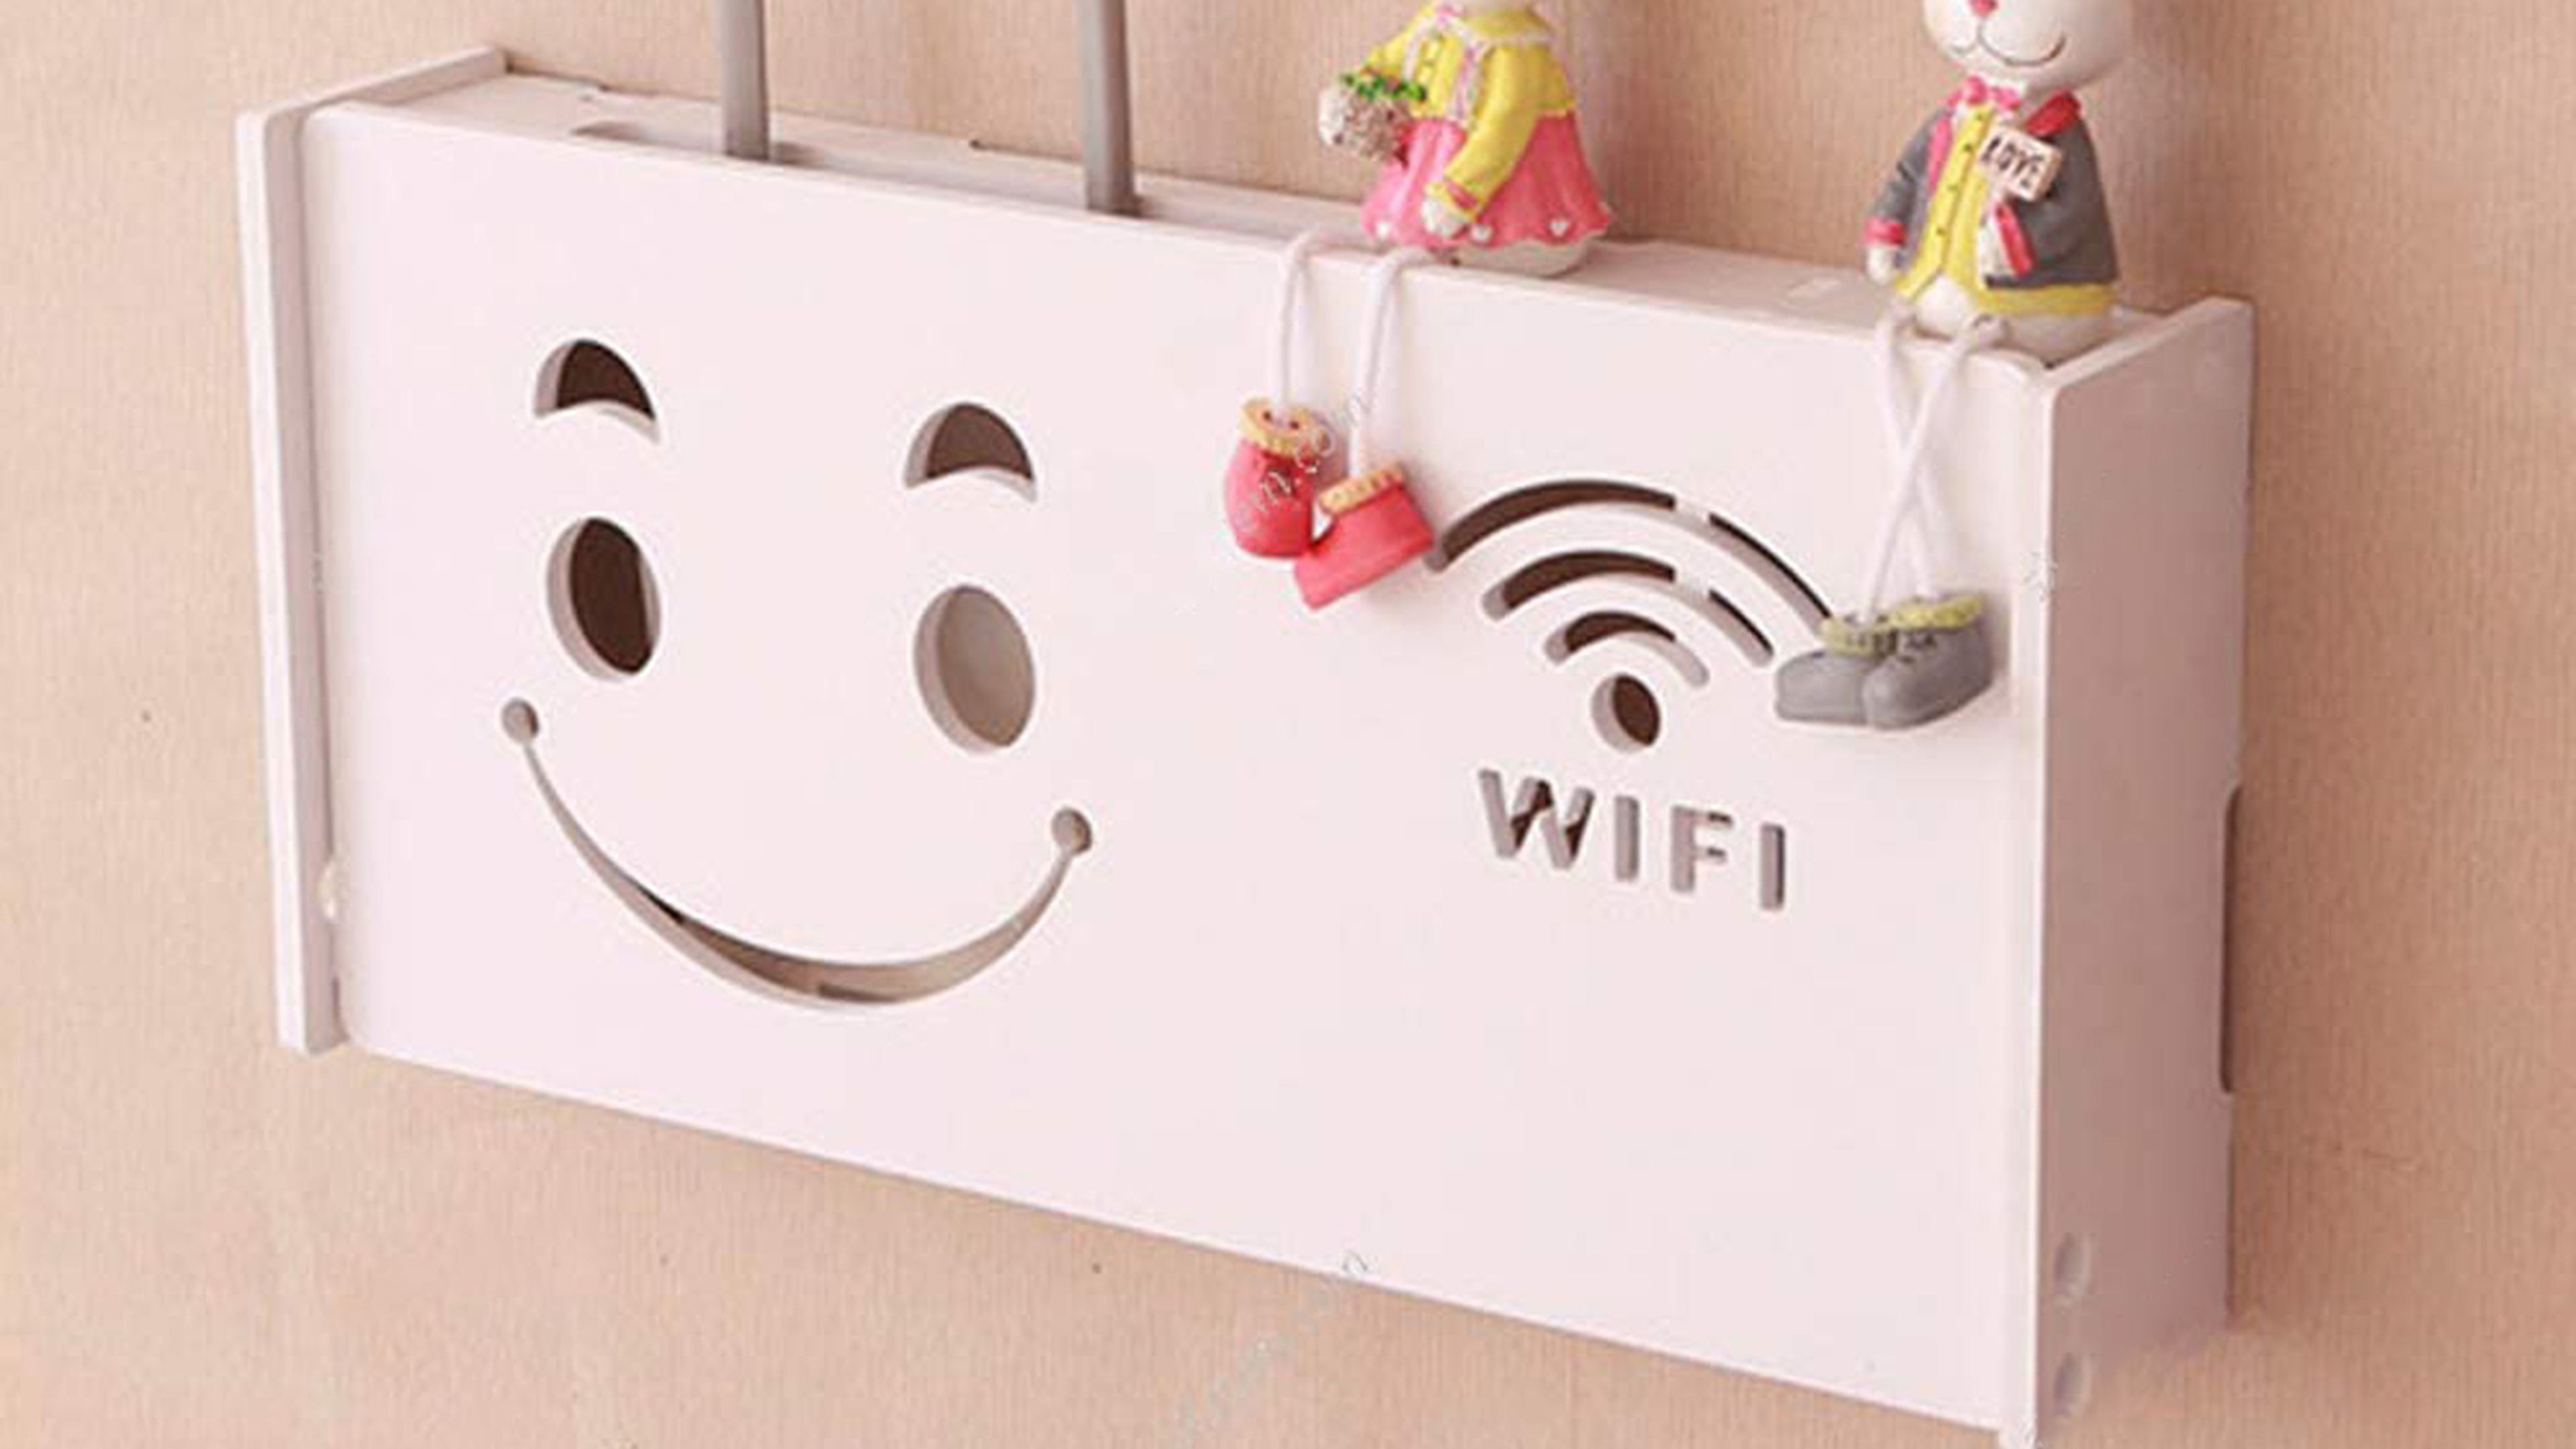 Mueble router